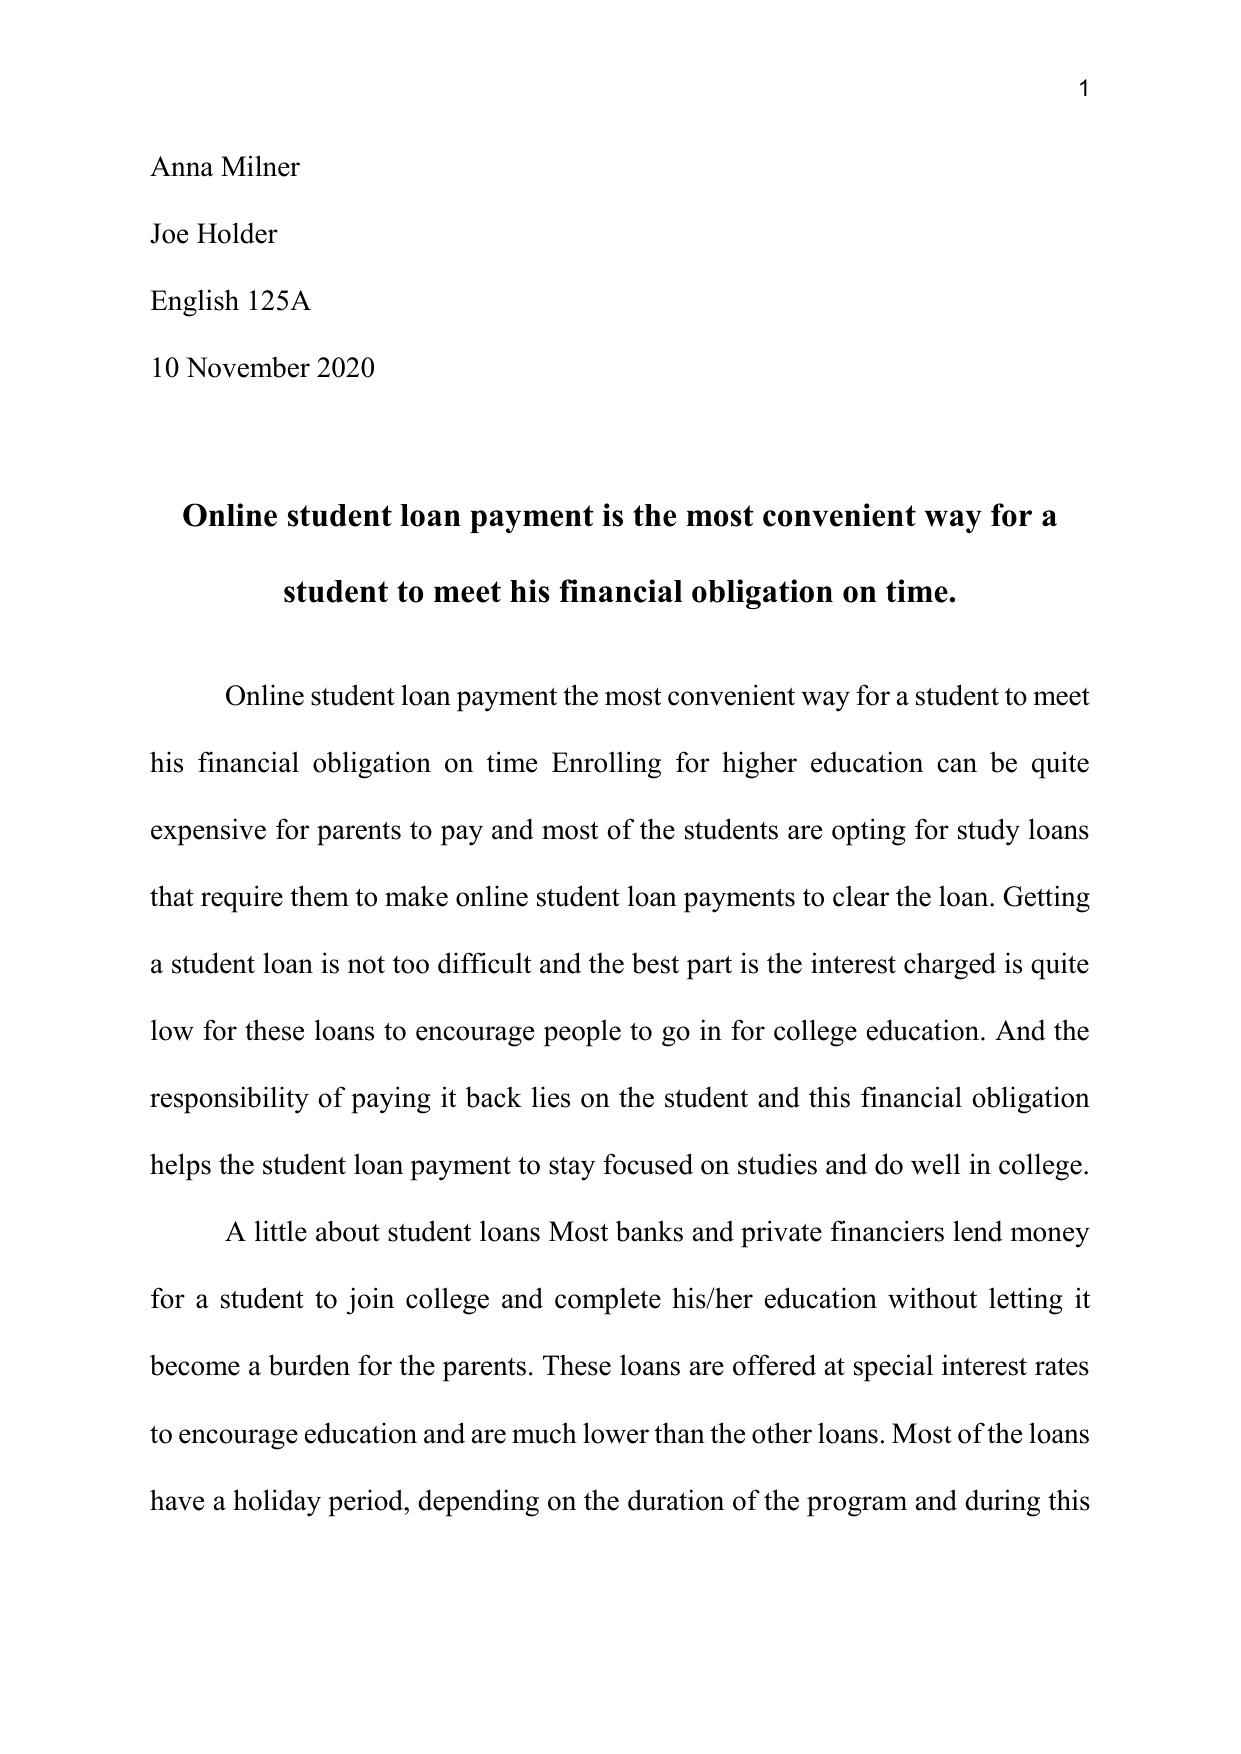 essay on online payment